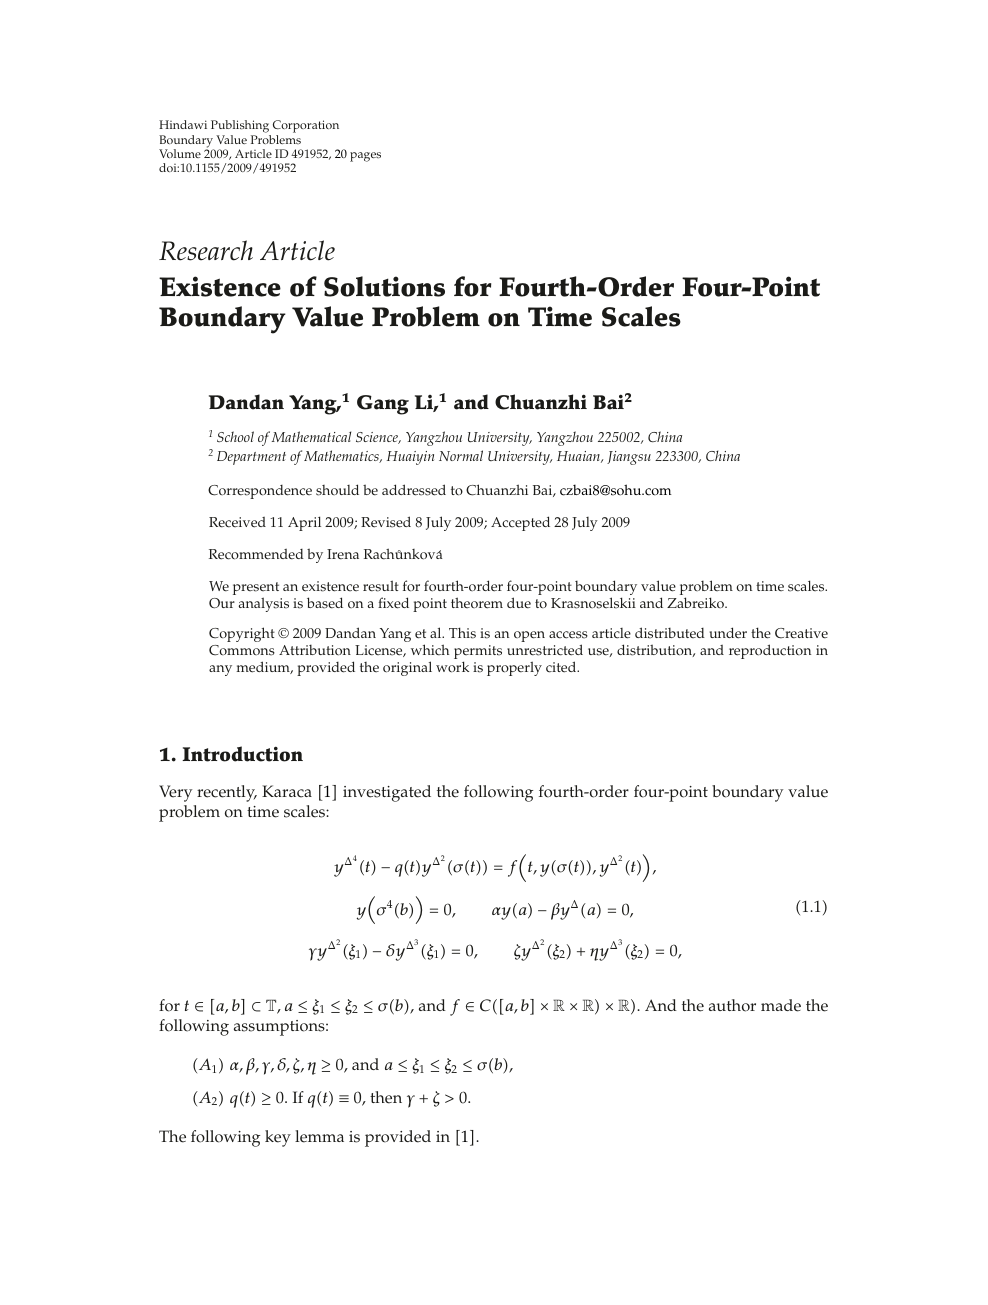 Existence Of Solutions For Fourth Order Four Point Boundary Value Problem On Time Scales Topic Of Research Paper In Mathematics Download Scholarly Article Pdf And Read For Free On Cyberleninka Open Science Hub